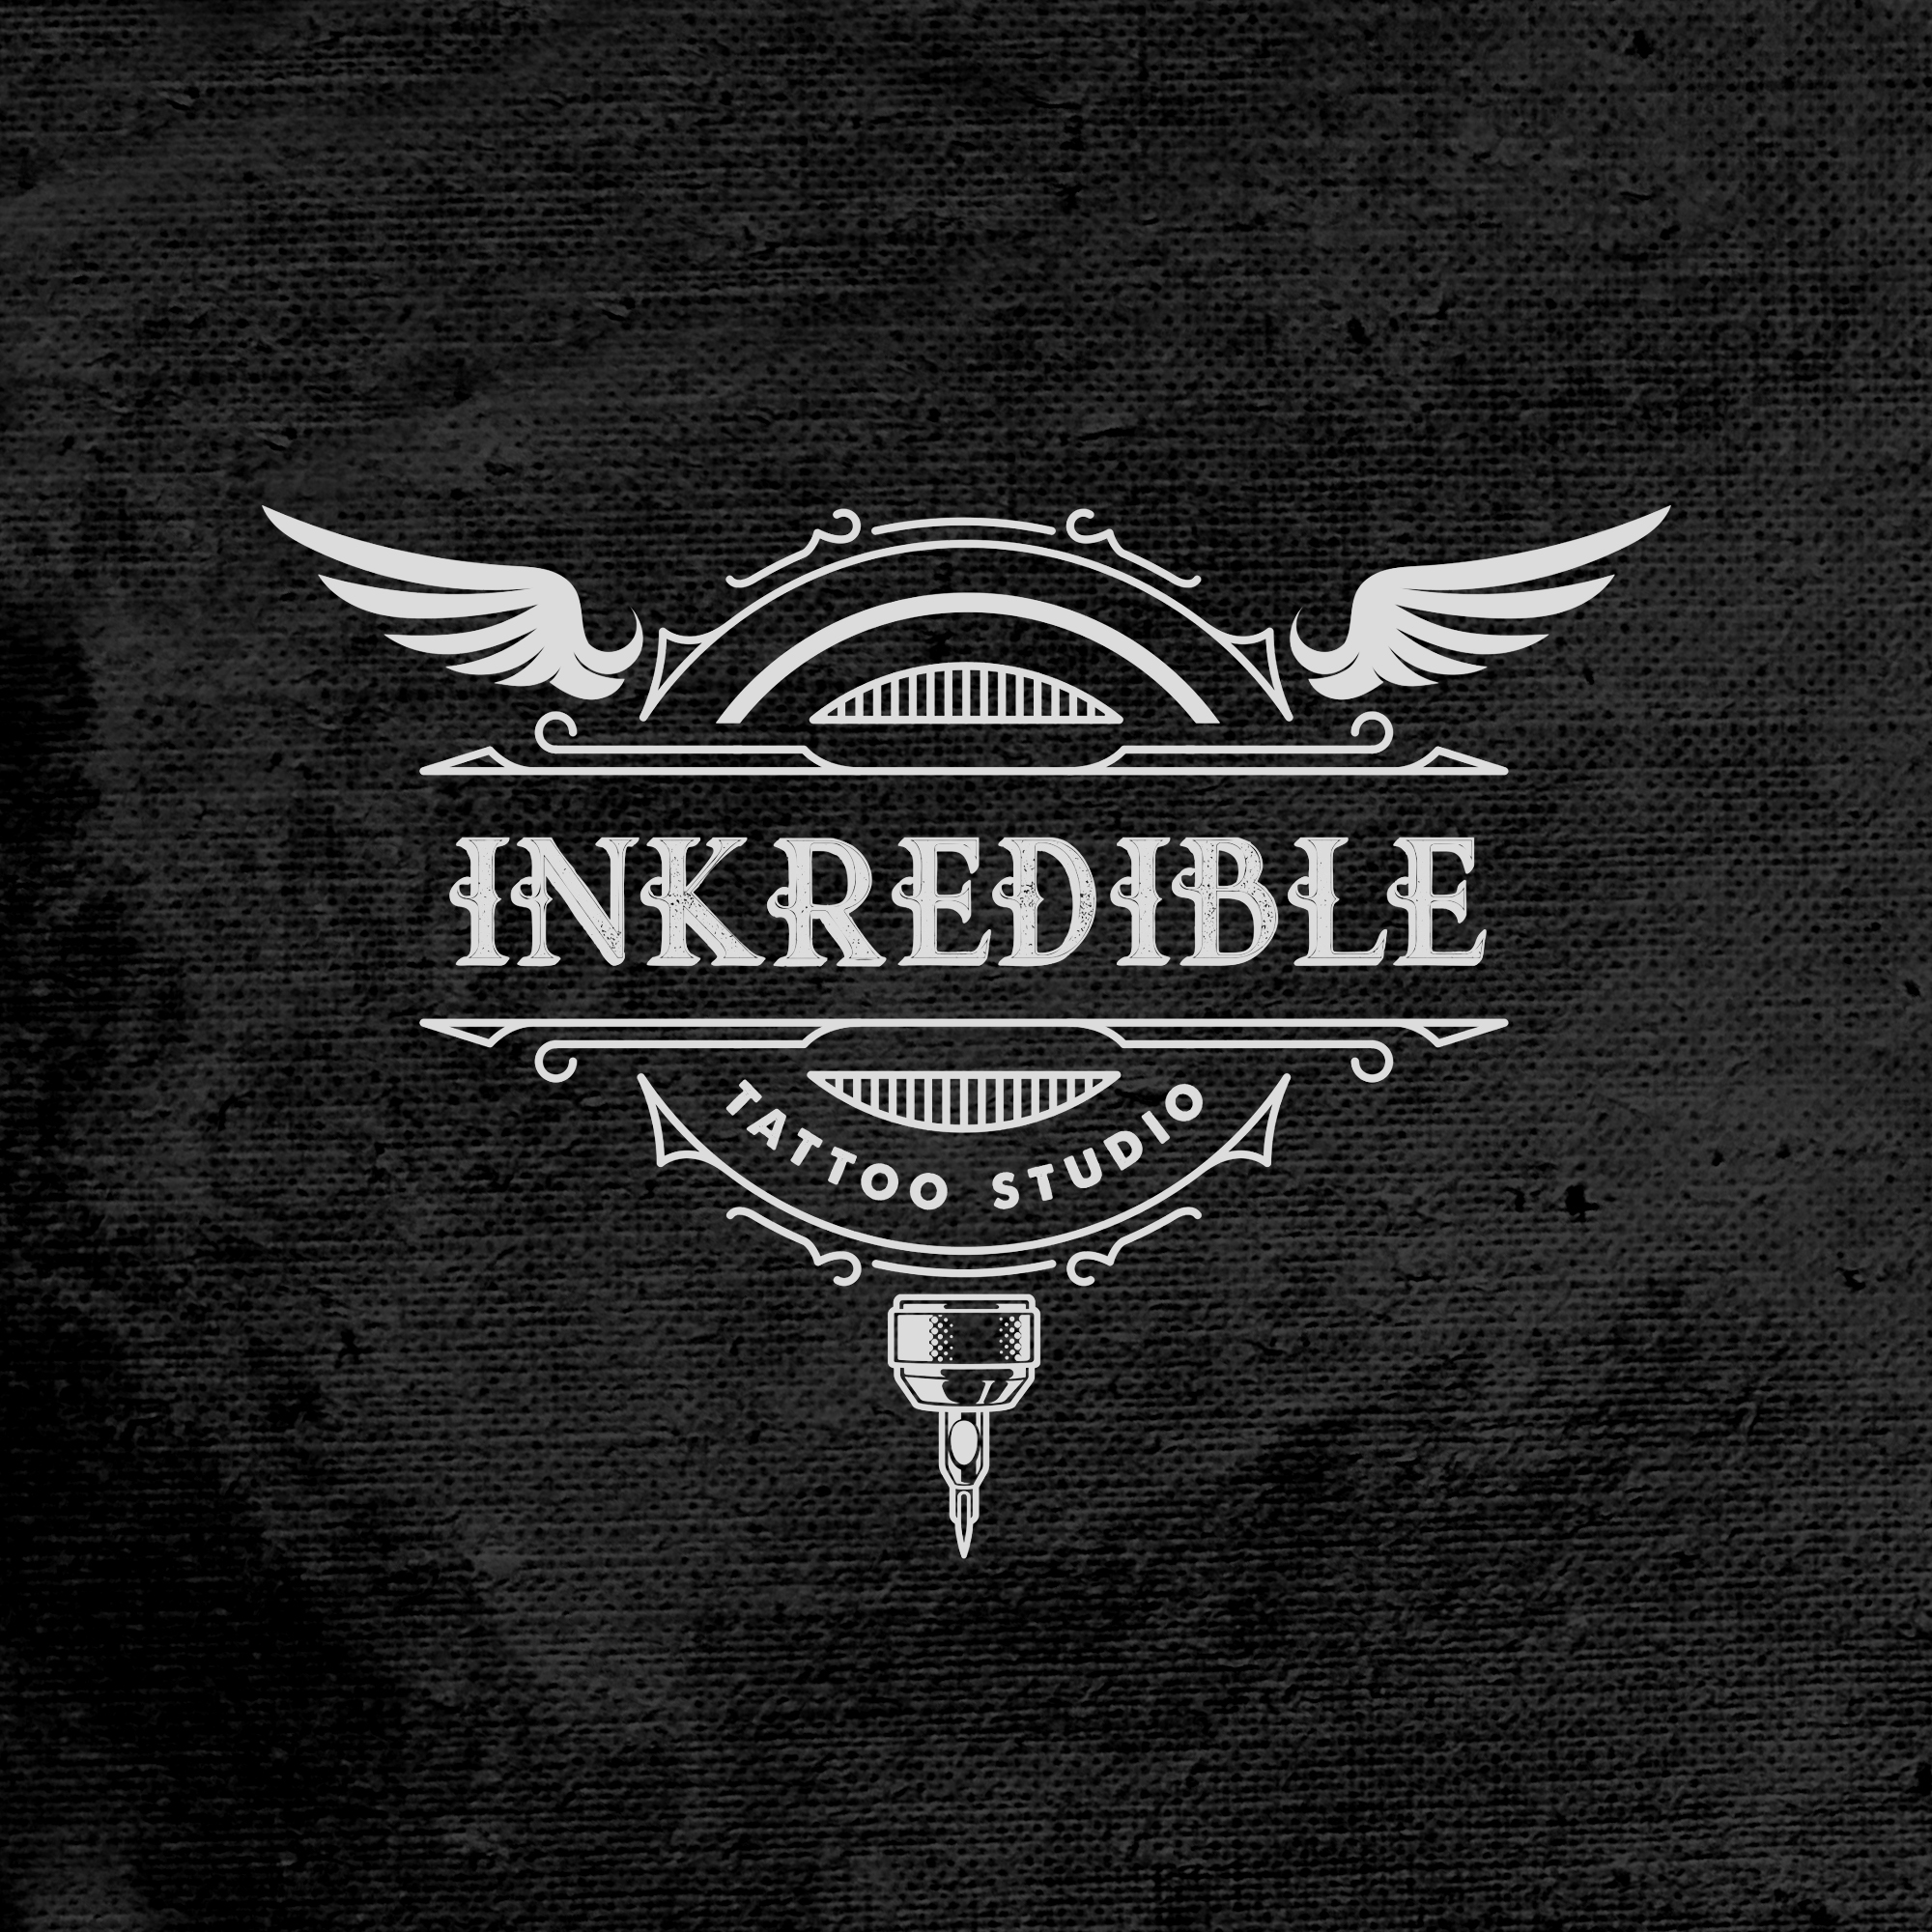 INKcredible tattoo (@inkcredible_tattoo_vb) • Instagram photos and videos